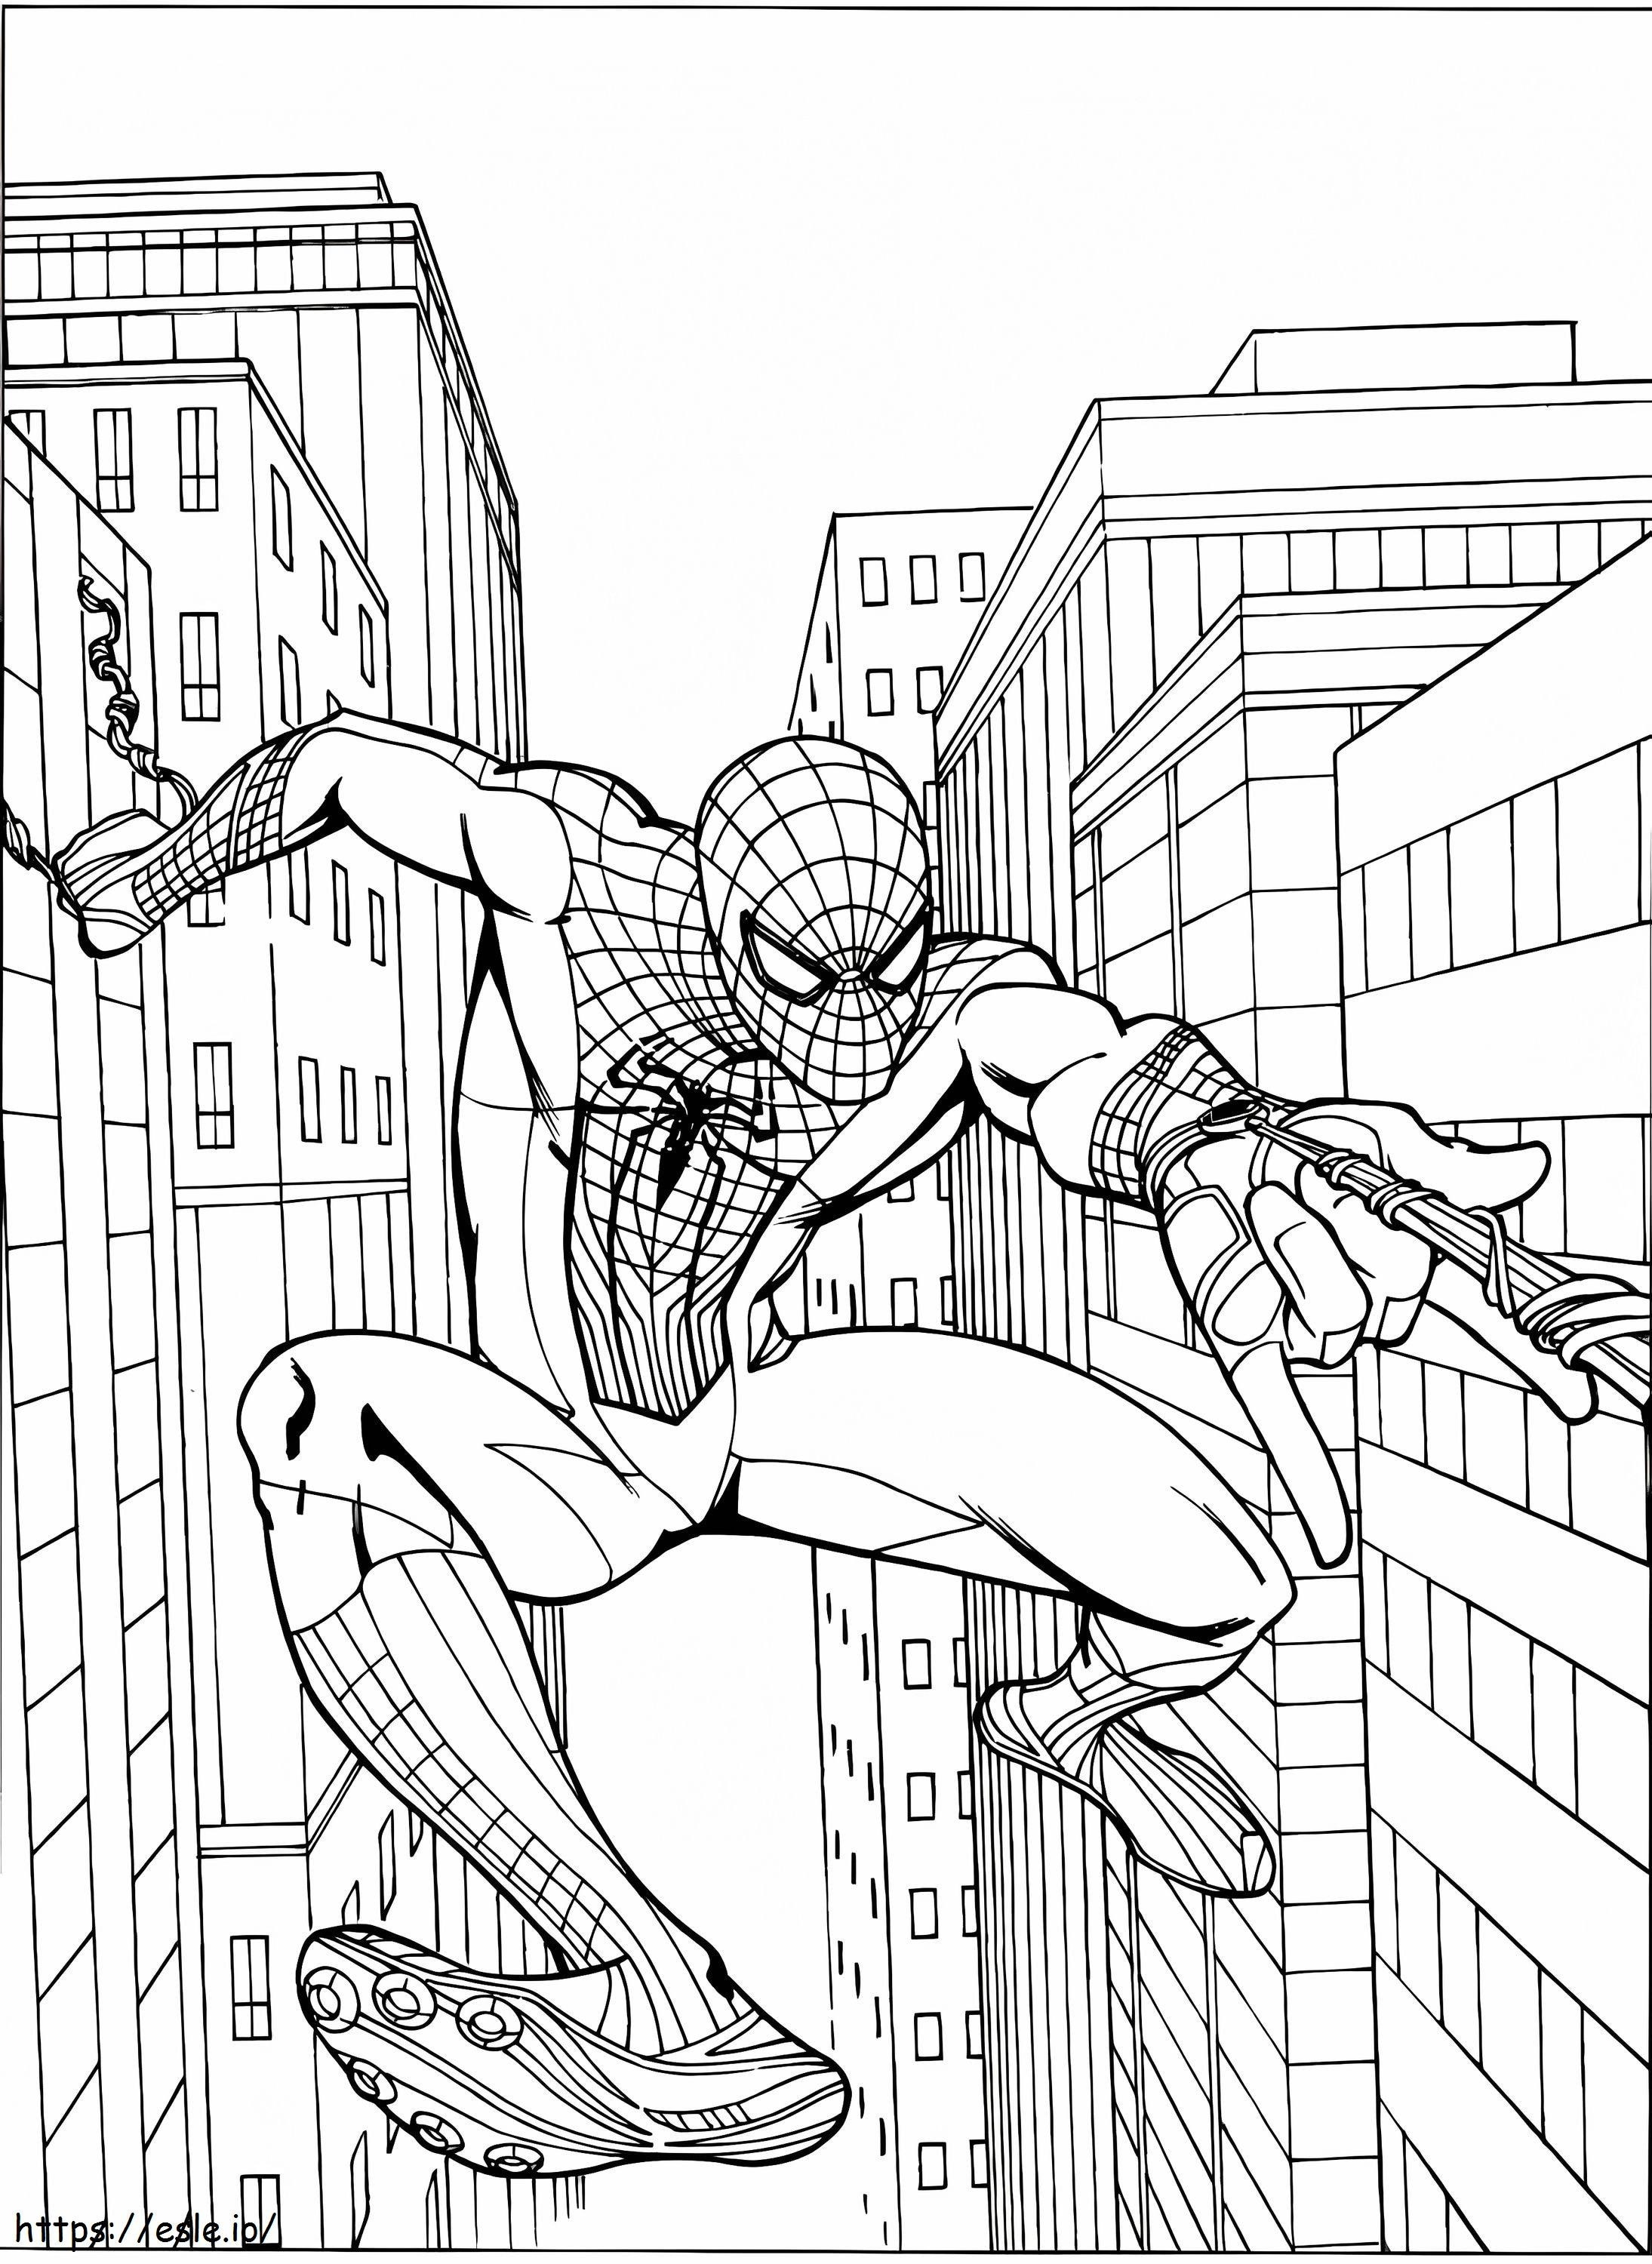 Spiderman In The City coloring page